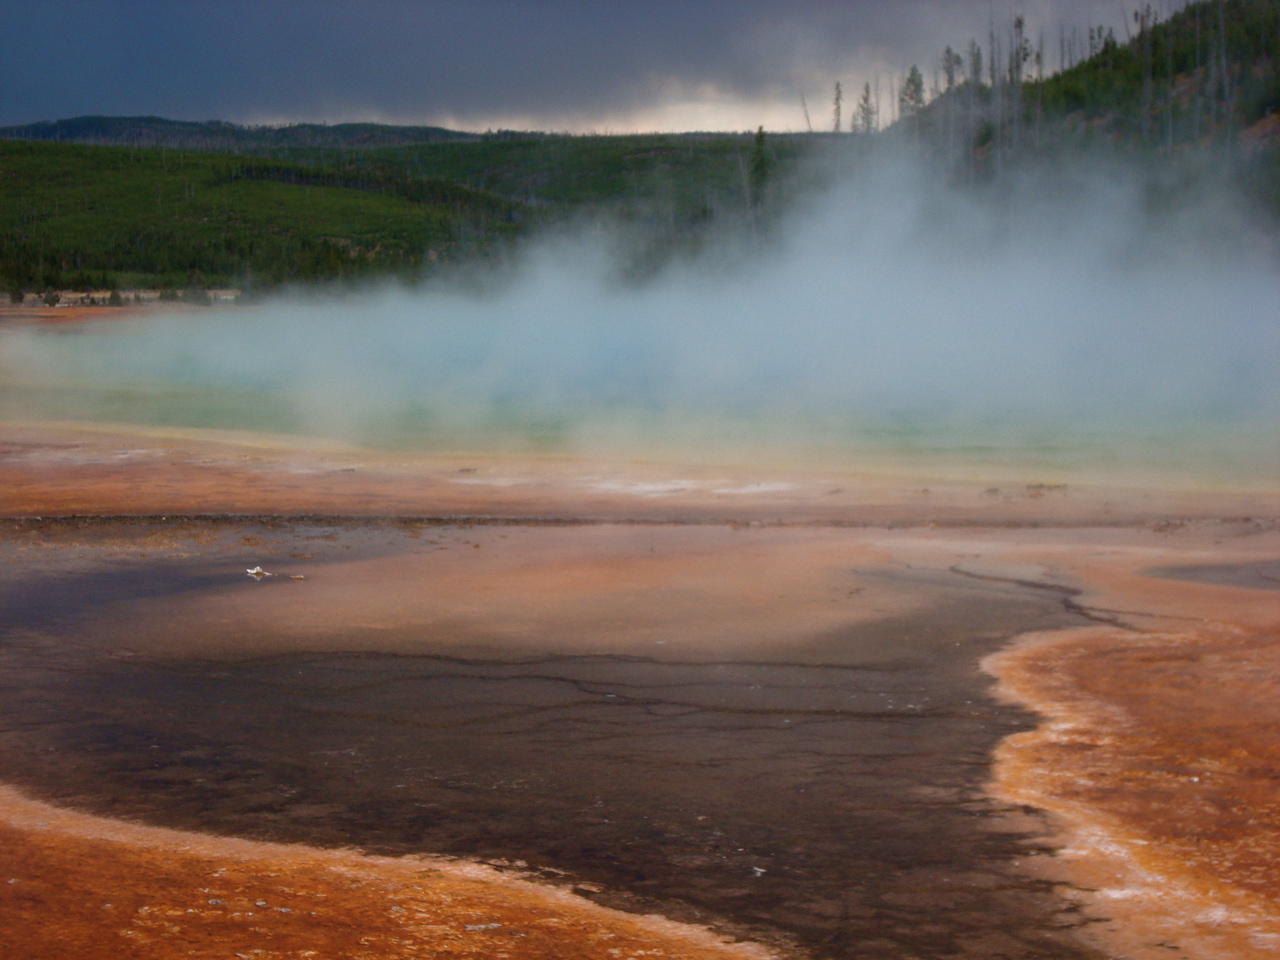 Day 262/366: Grand Prismatic Spring and Approaching Storm